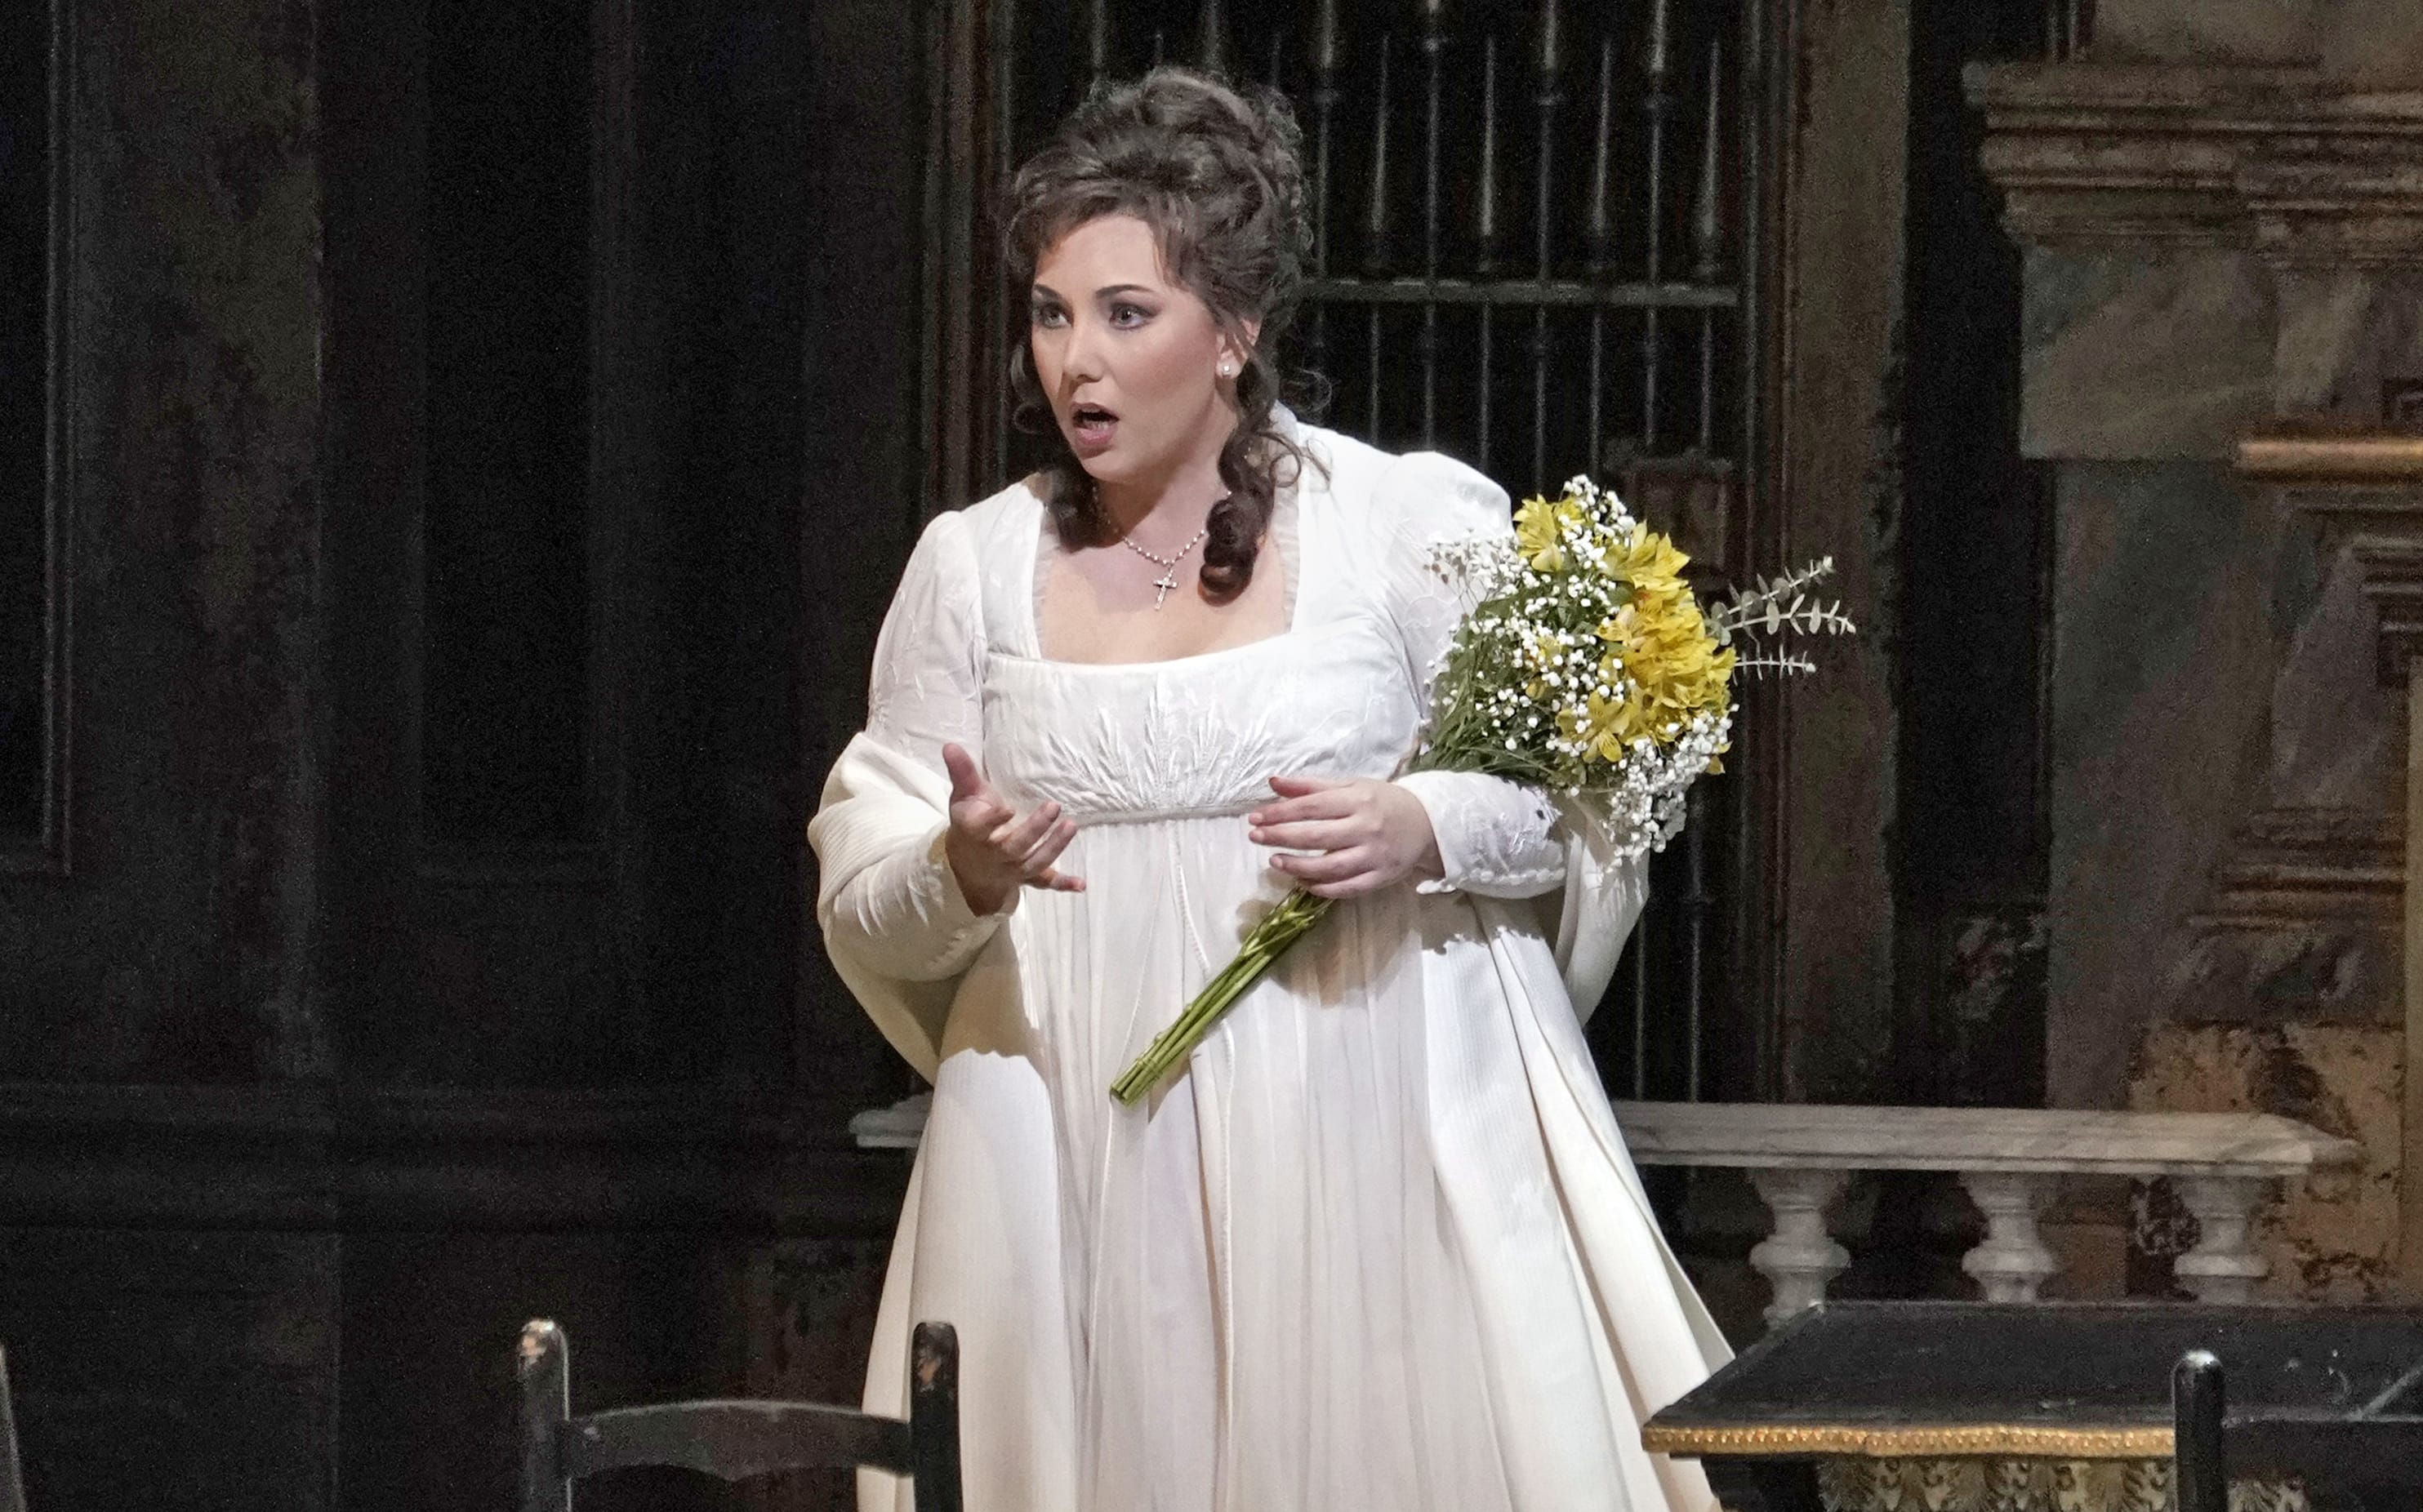 Jennifer Rowley as Tosca at The Met